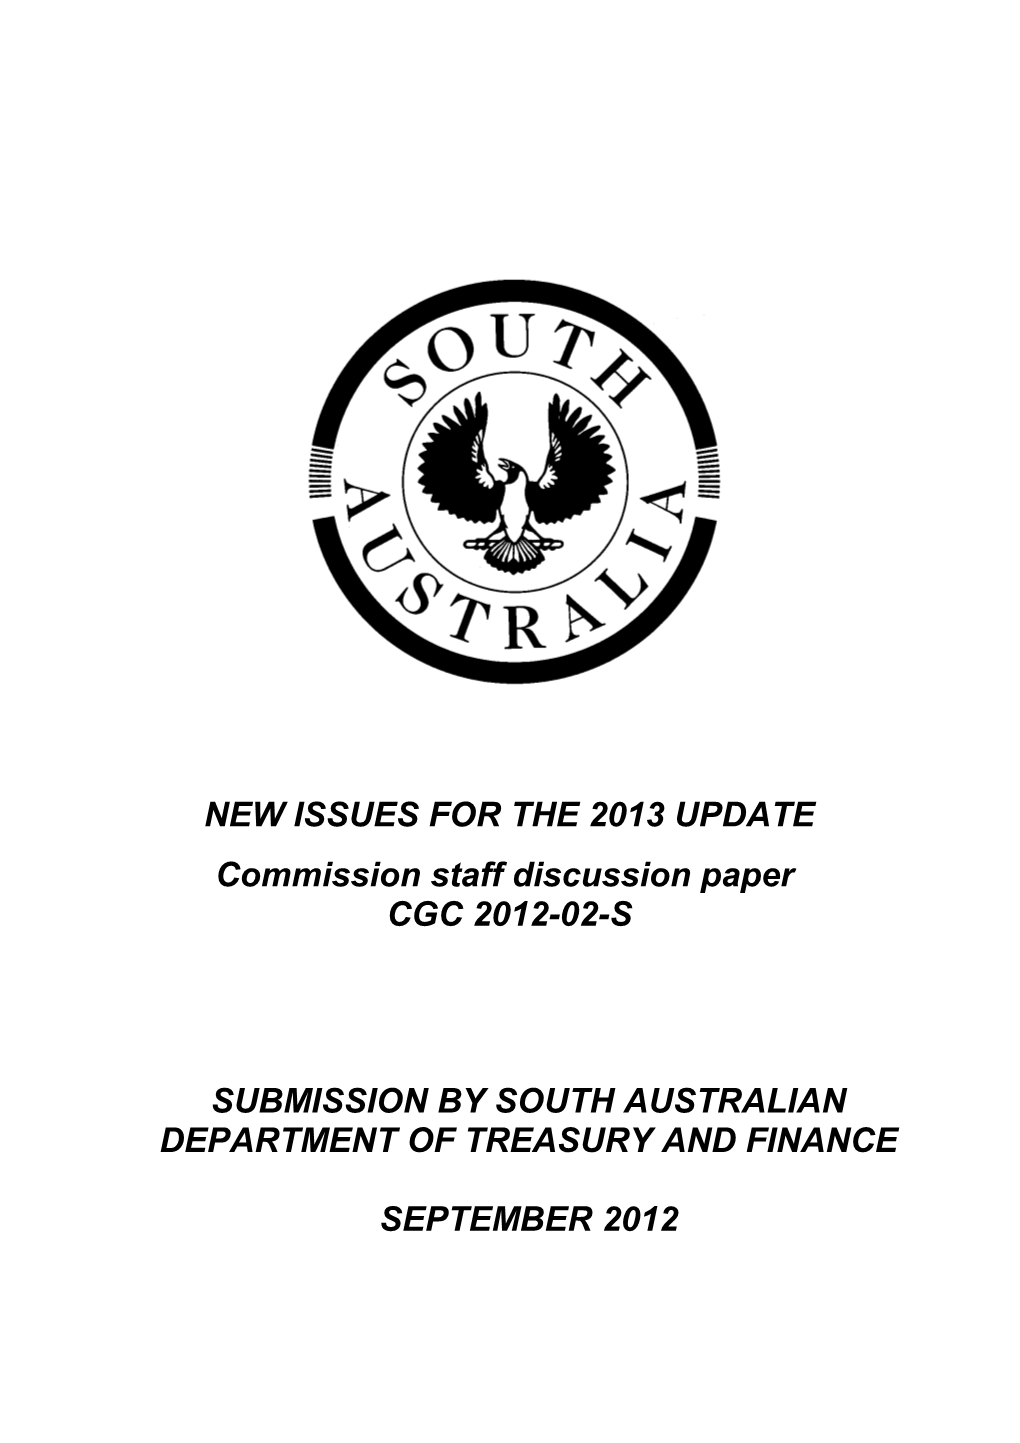 South Australian Submission on New Issues for the 2012 Update